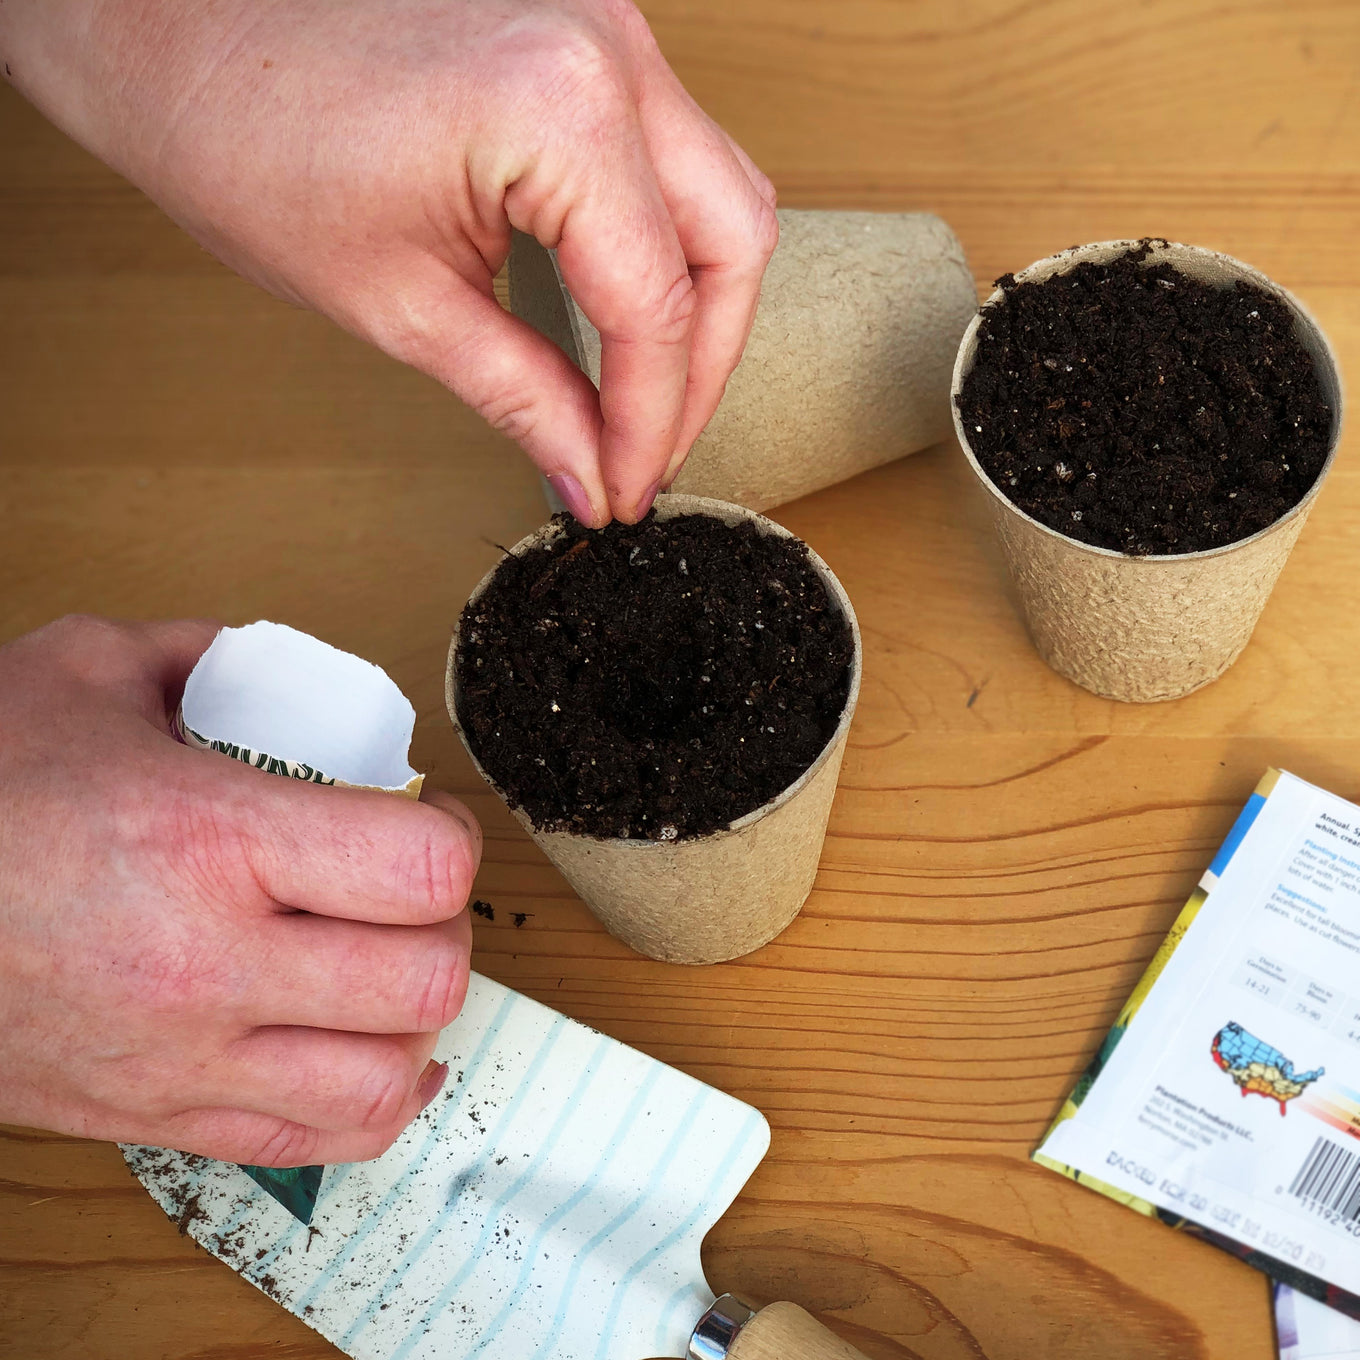 Start your Jack O Lantern pumpkin seeds in biodegradable Jiffy peat pots filled with seed starting mix. Peat pots prevent root shock during transplanting.